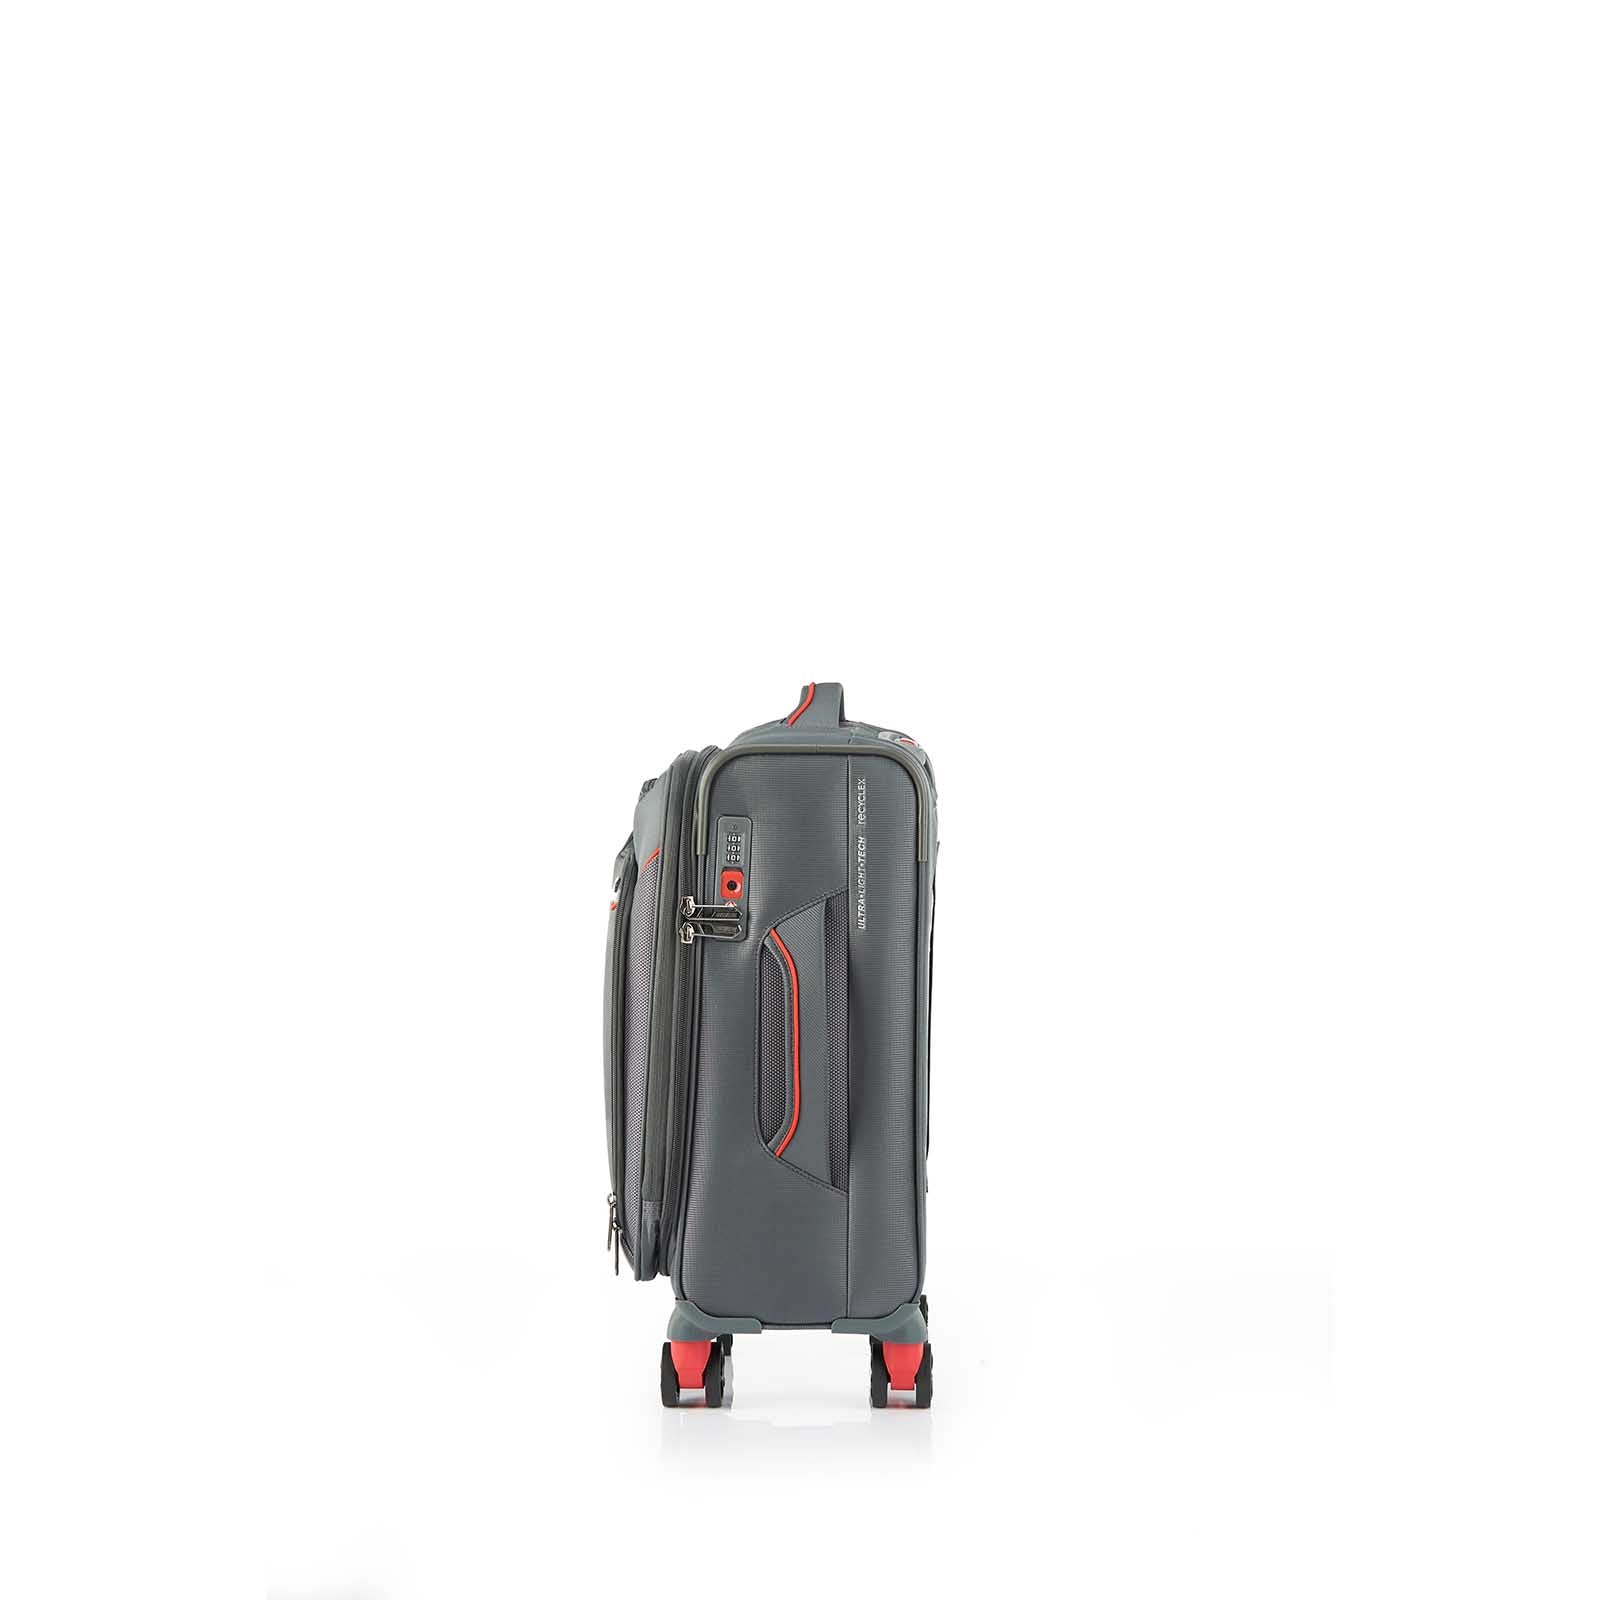 American-Tourister-Applite-4-Eco-55cm-Carry-On-Suitcase-Grey-Red-Side-Handle